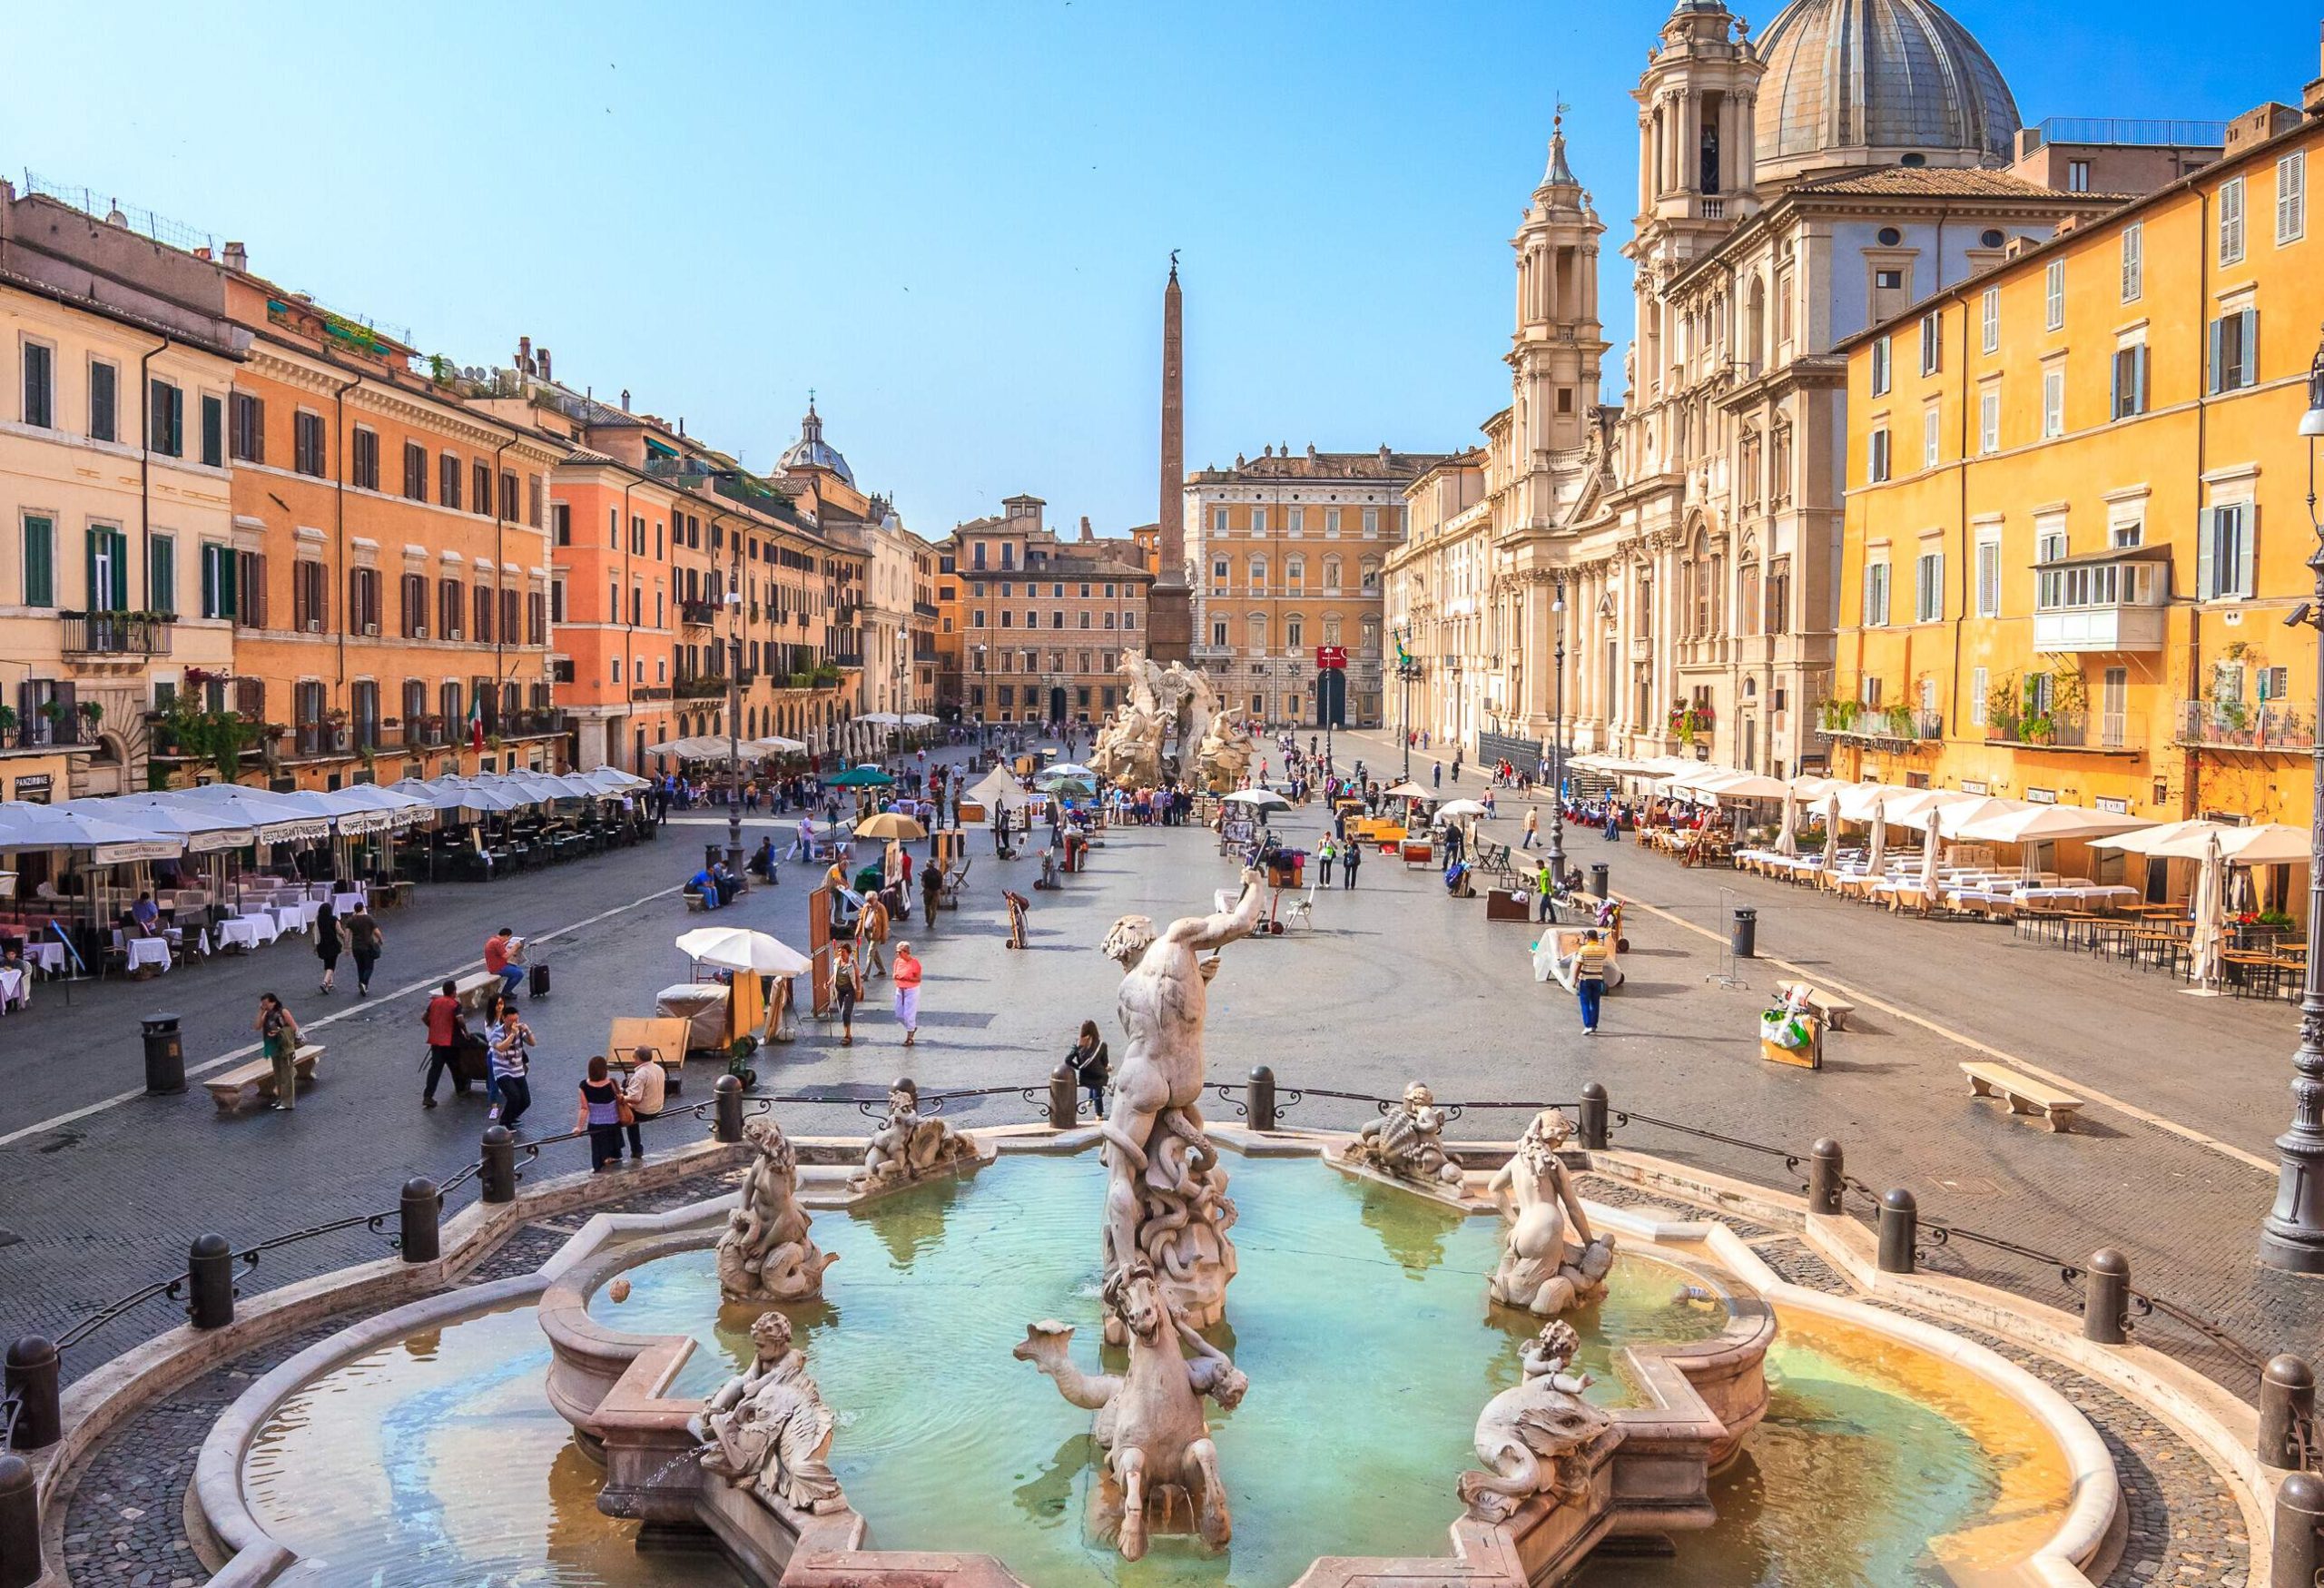 The Fontana del Nettuno, a magnificent Baroque fountain featuring a statue of Neptune surrounded by sea creatures and cherubs, is located in a bustling square with shops, cafes, and historic buildings.